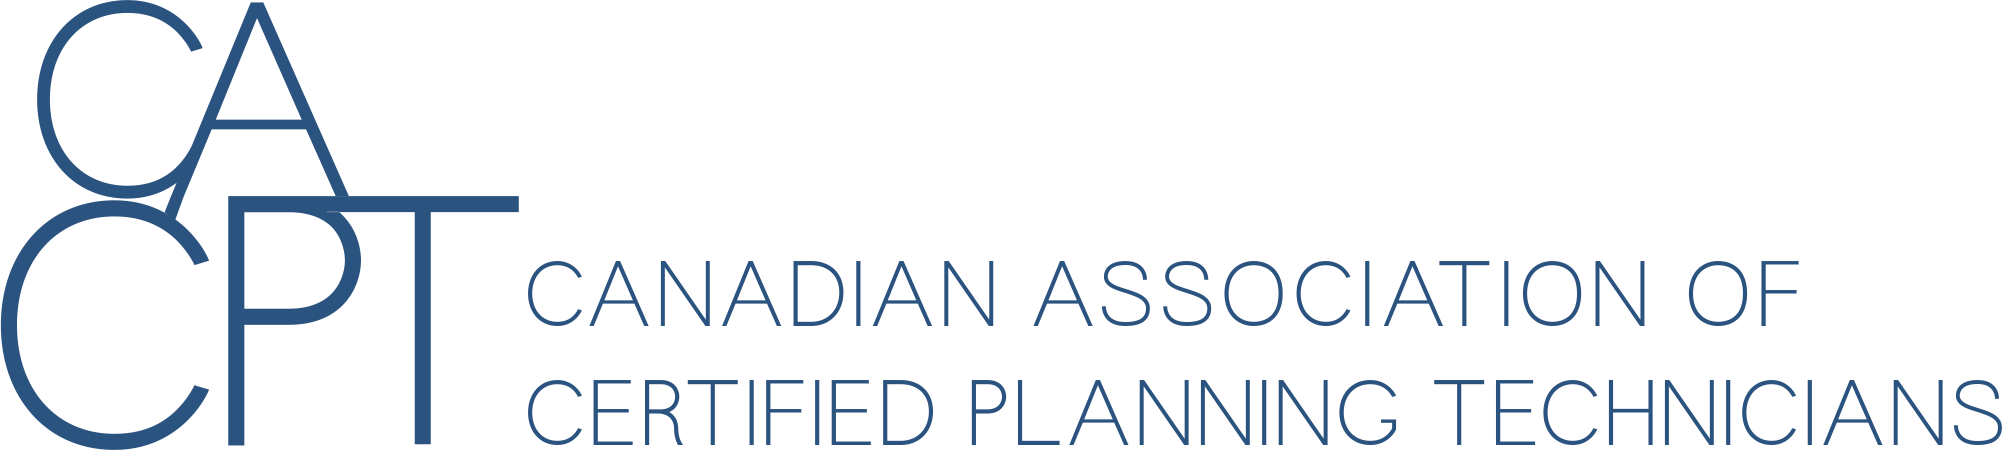 Canadian Association of Certified Technicians (CACPT)